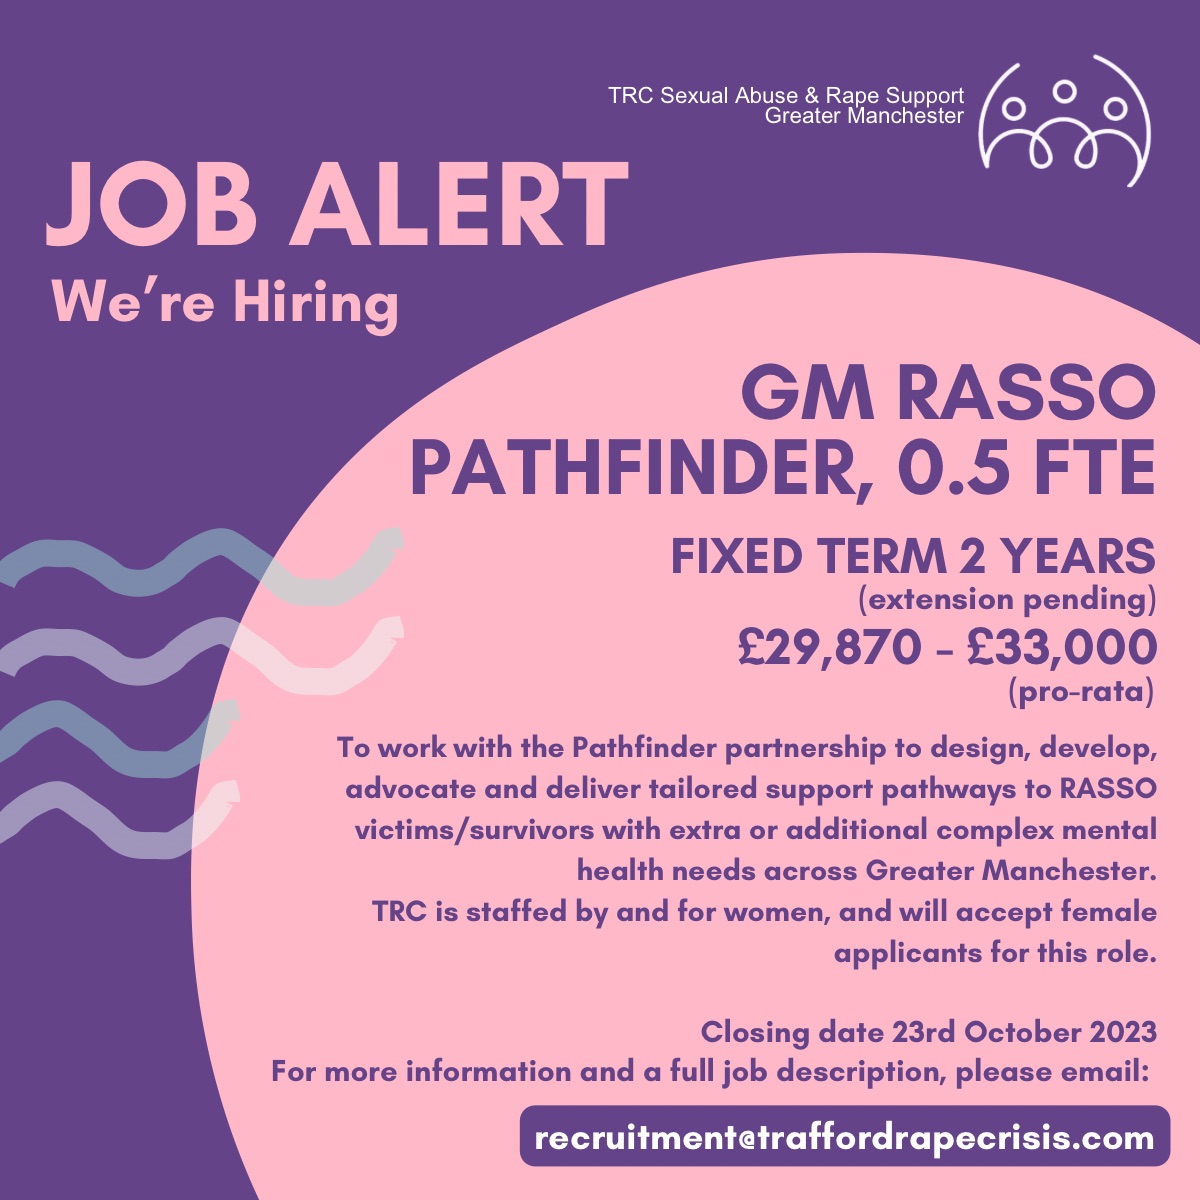 We have a new job opportunity for someone able to offer support to those with complex mental health needs.

For more information and a full job description please email recruitment@traffordrapecrisis.com

Closes 23rd October 2023

#charityjobs #greatermanchesterjobs #feministjobs